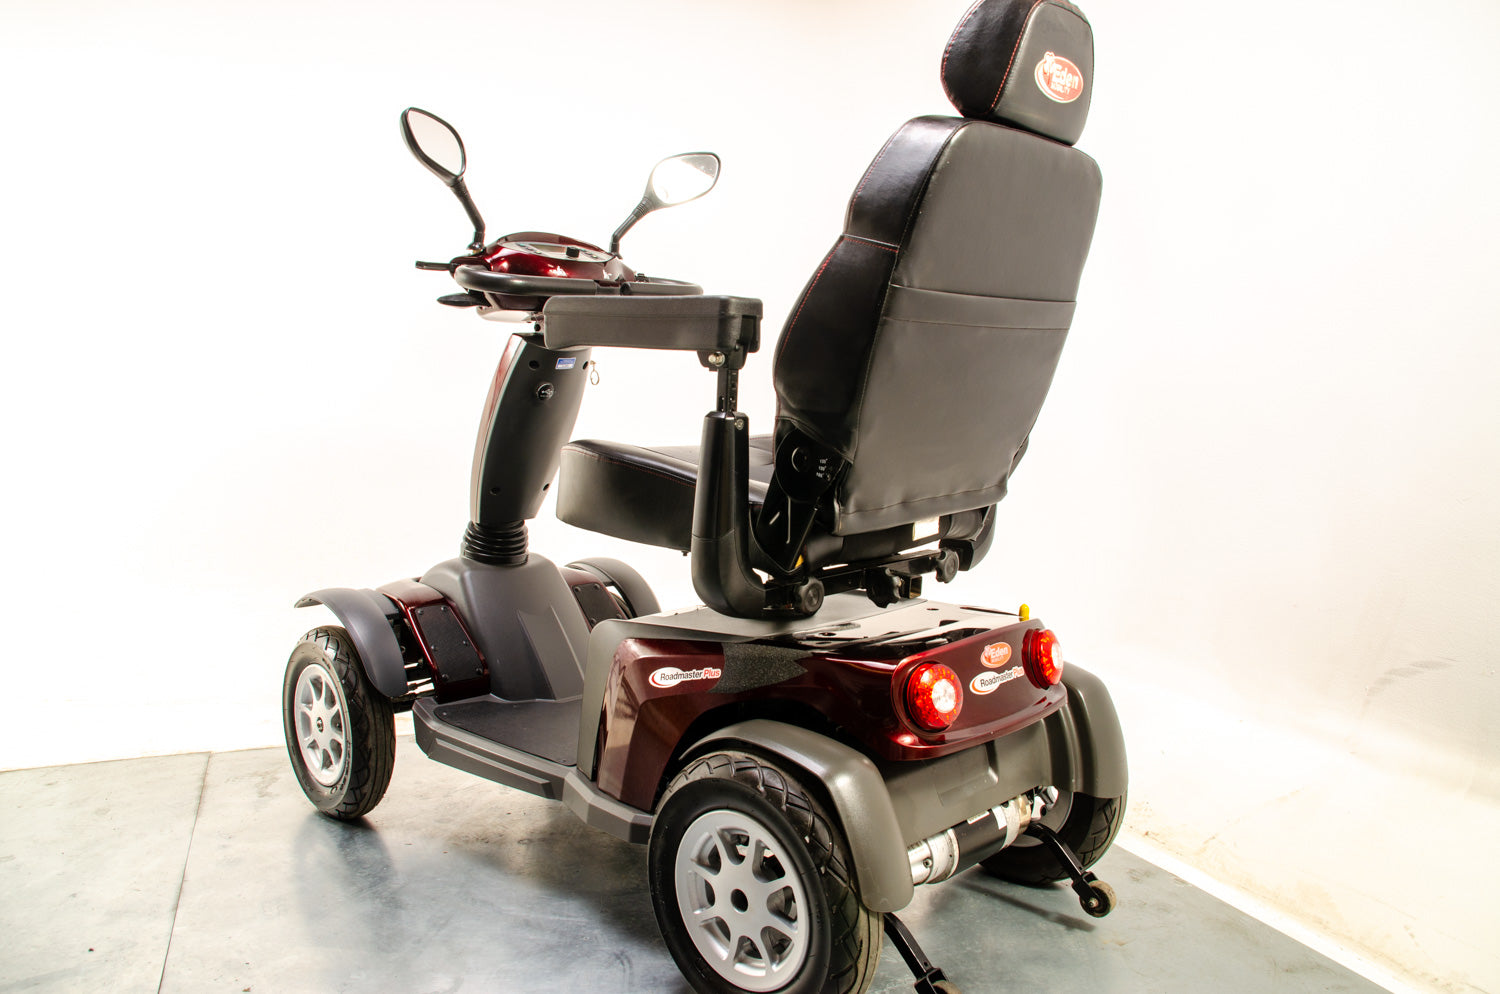 Products Eden Roadmaster Plus All-Terrain Off-Road Used Mobility Scooter 8mph Luxury Electric Large 2019